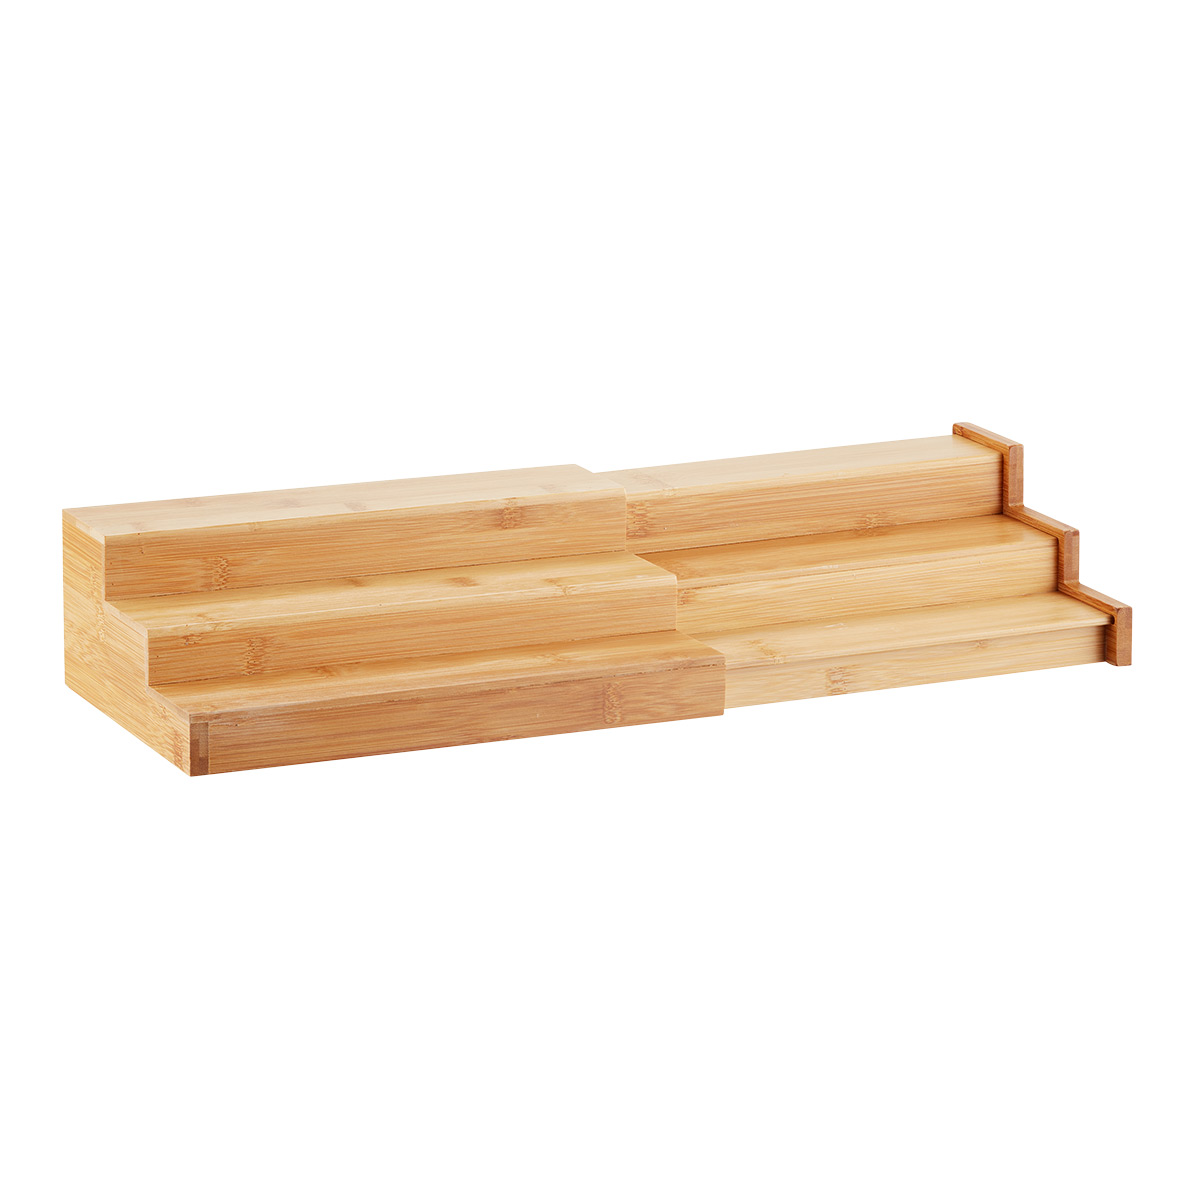 Tabletop Bamboo Spice Rack